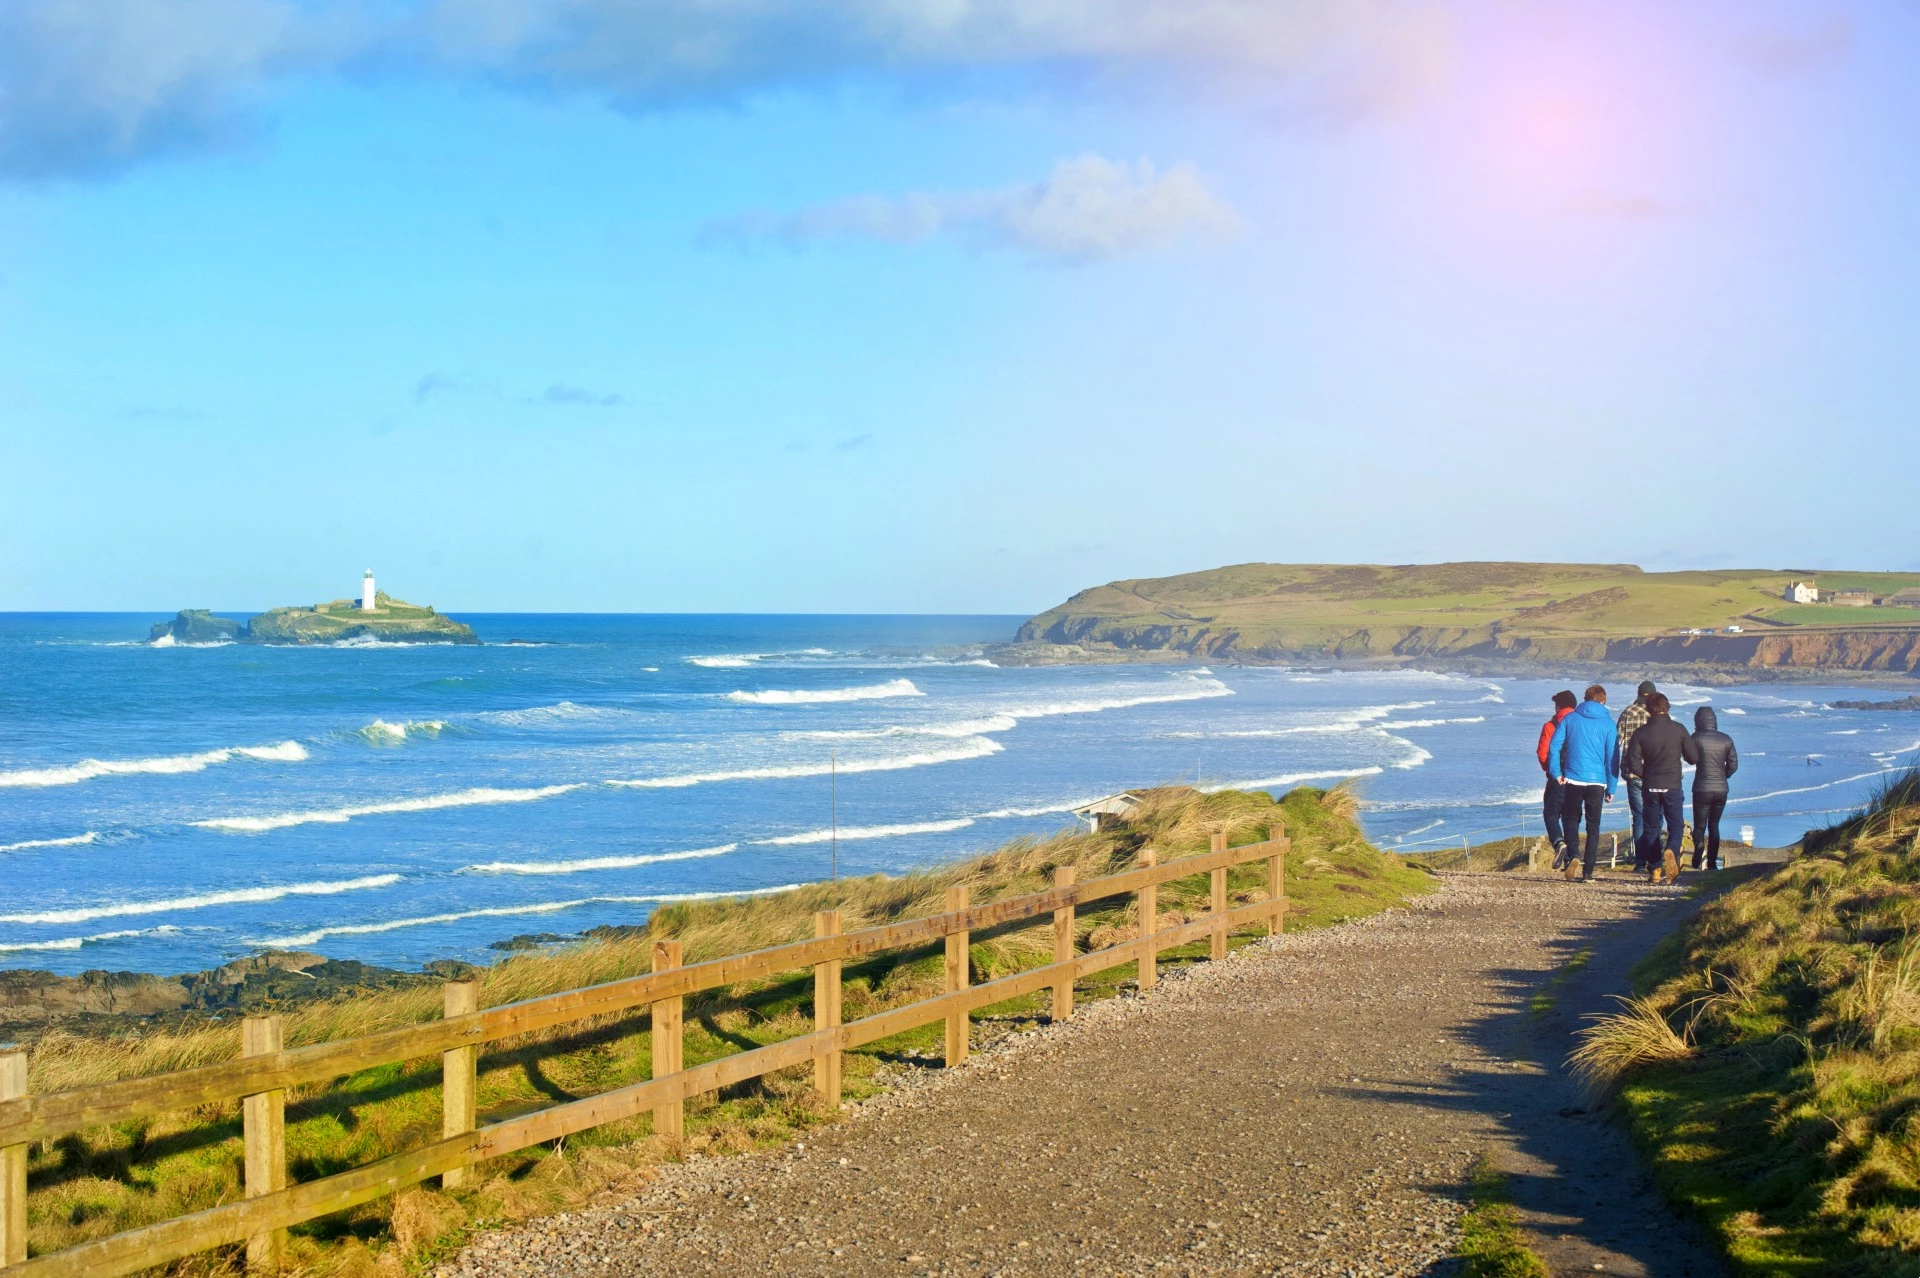 A bright sunny walk with Godrevy Lighthouse in the distance